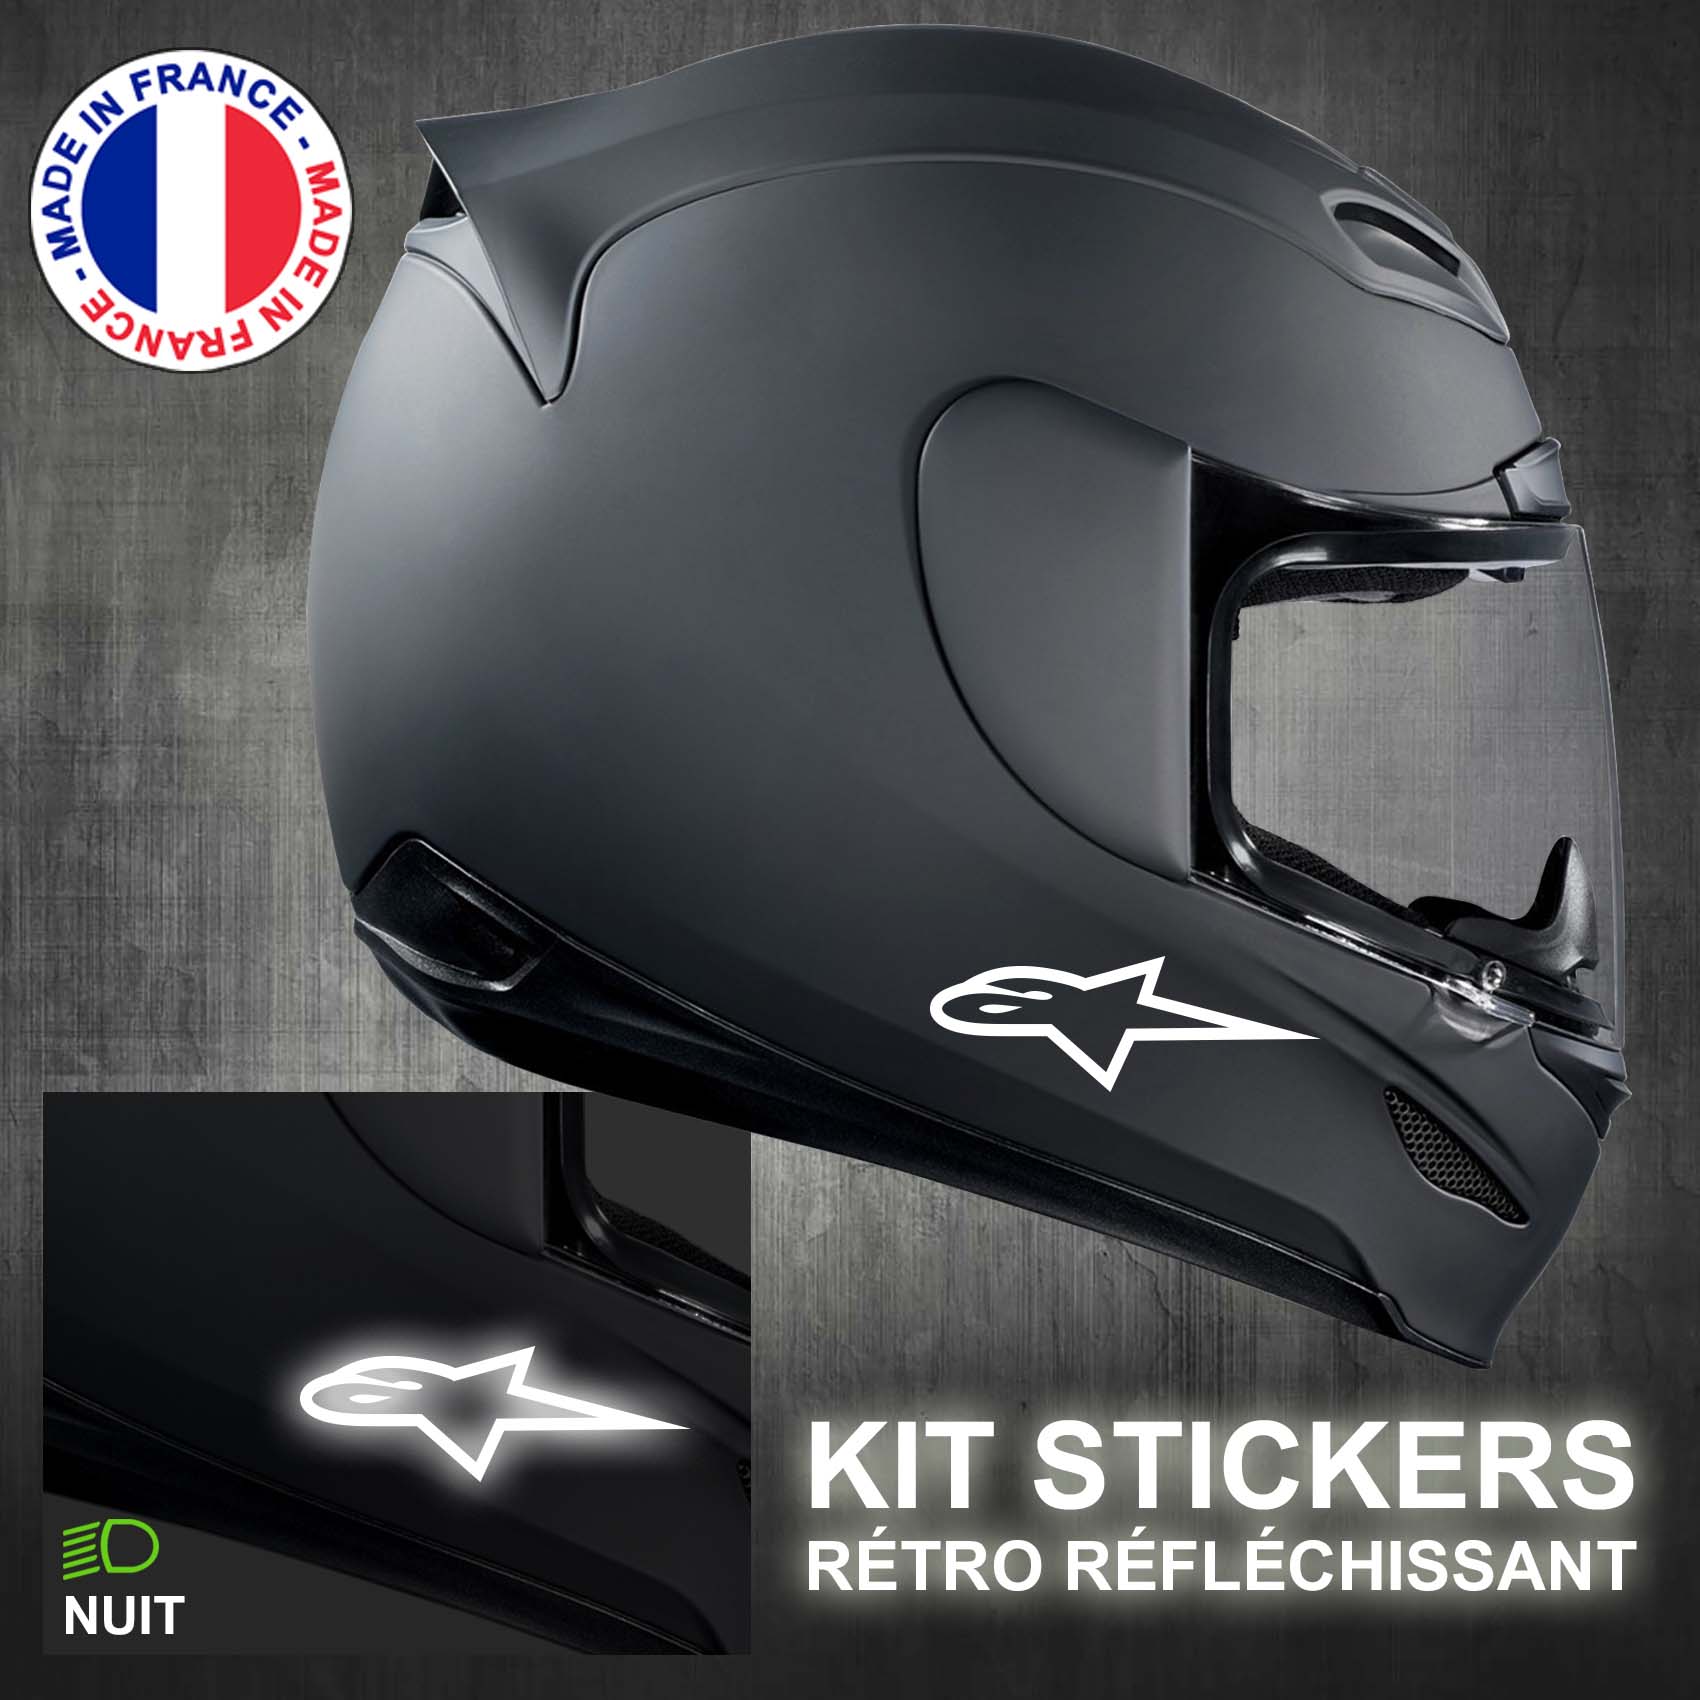 stickers-casque-moto-alpinestars-ref2-retro-reflechissant-autocollant-noir-moto-velo-tuning-racing-route-sticker-casques-adhesif-scooter-nuit-securite-decals-personnalise-personnalisable-min